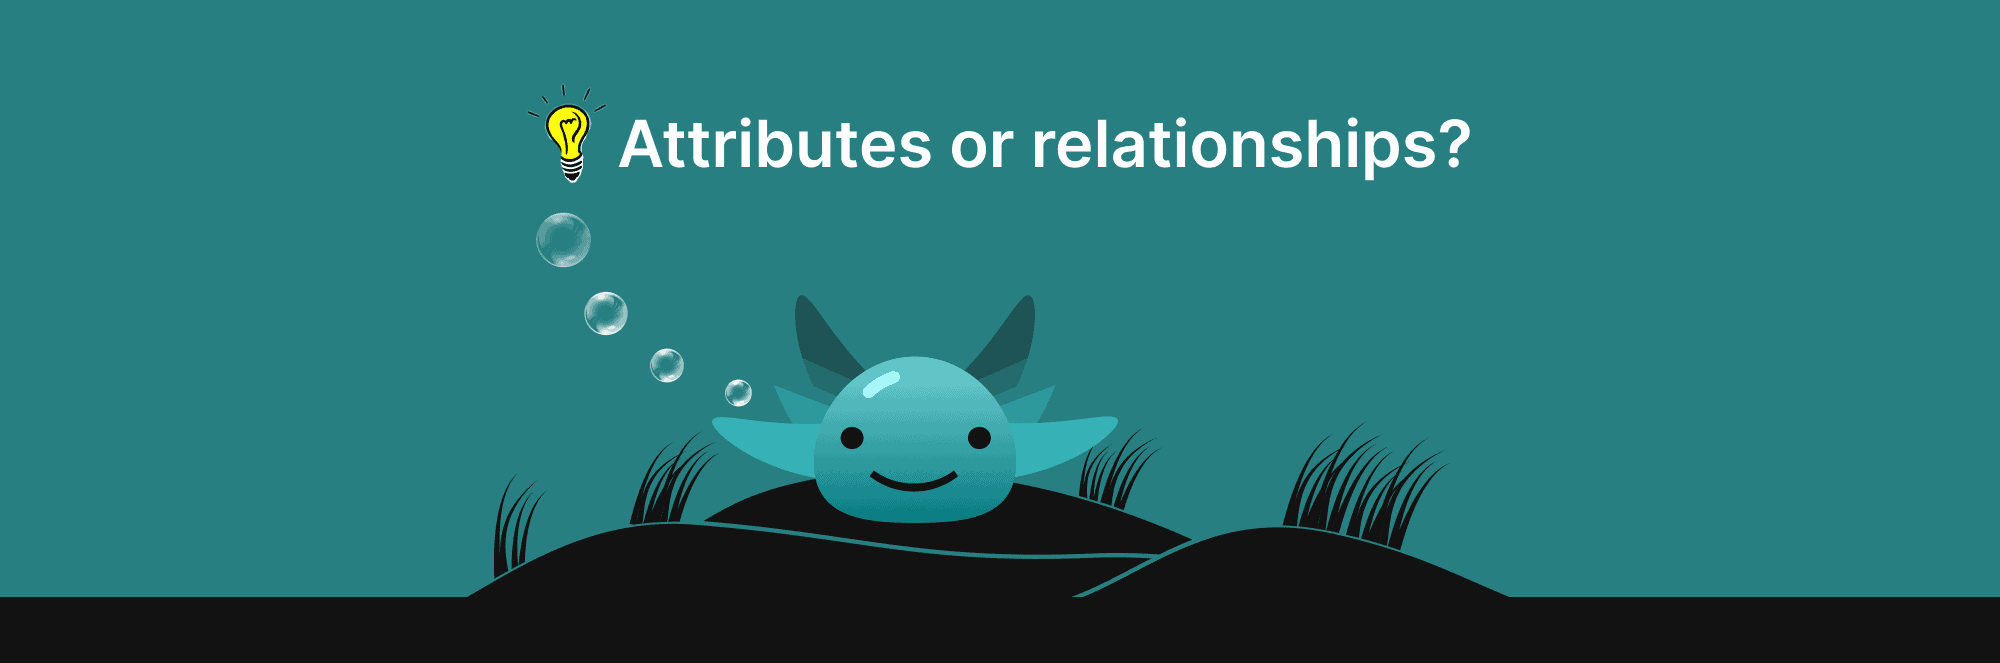 Illustration of smiling fish thinking "attributes or relationships?"